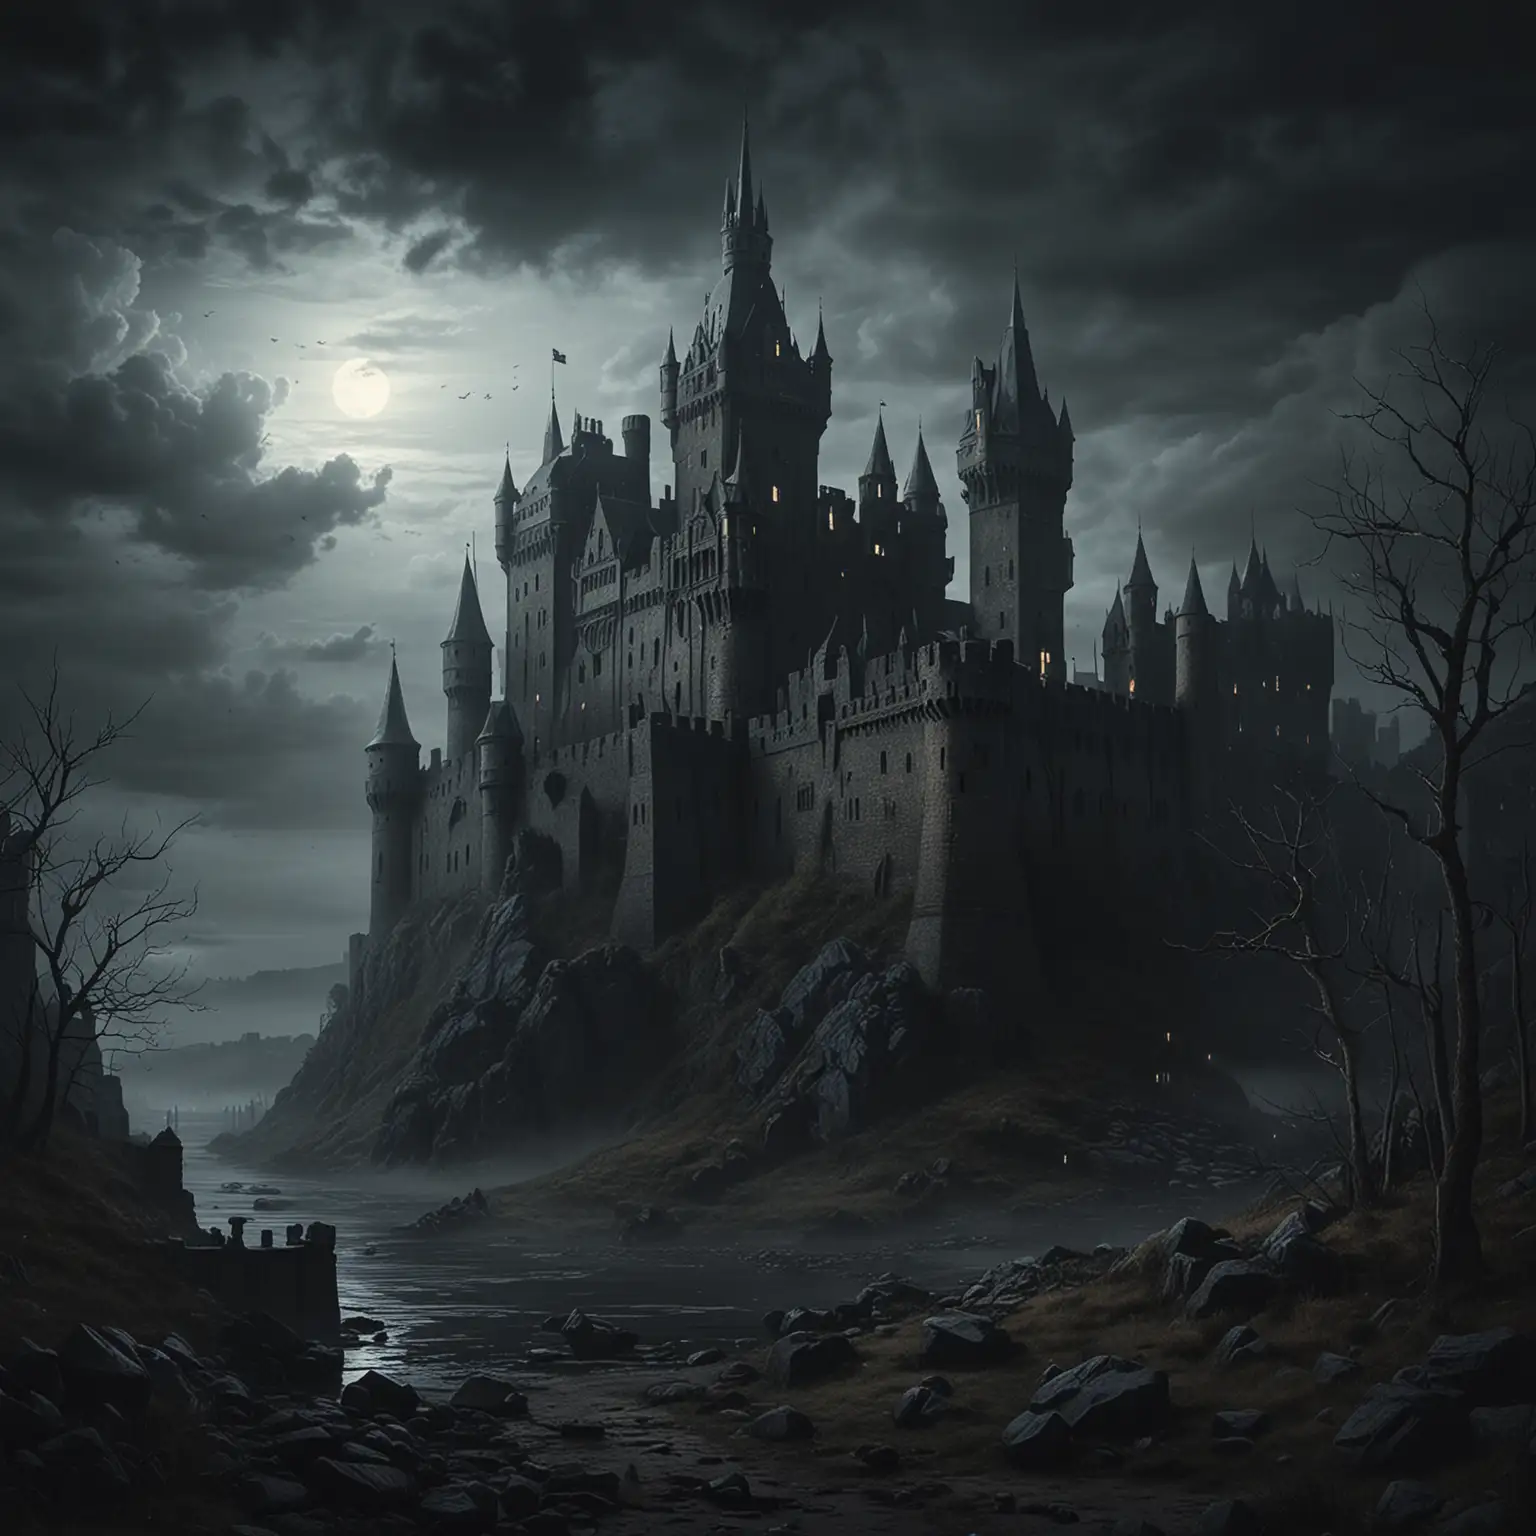 Medieval-Castle-in-Dark-Seclusion-Amidst-Eerie-Landscape